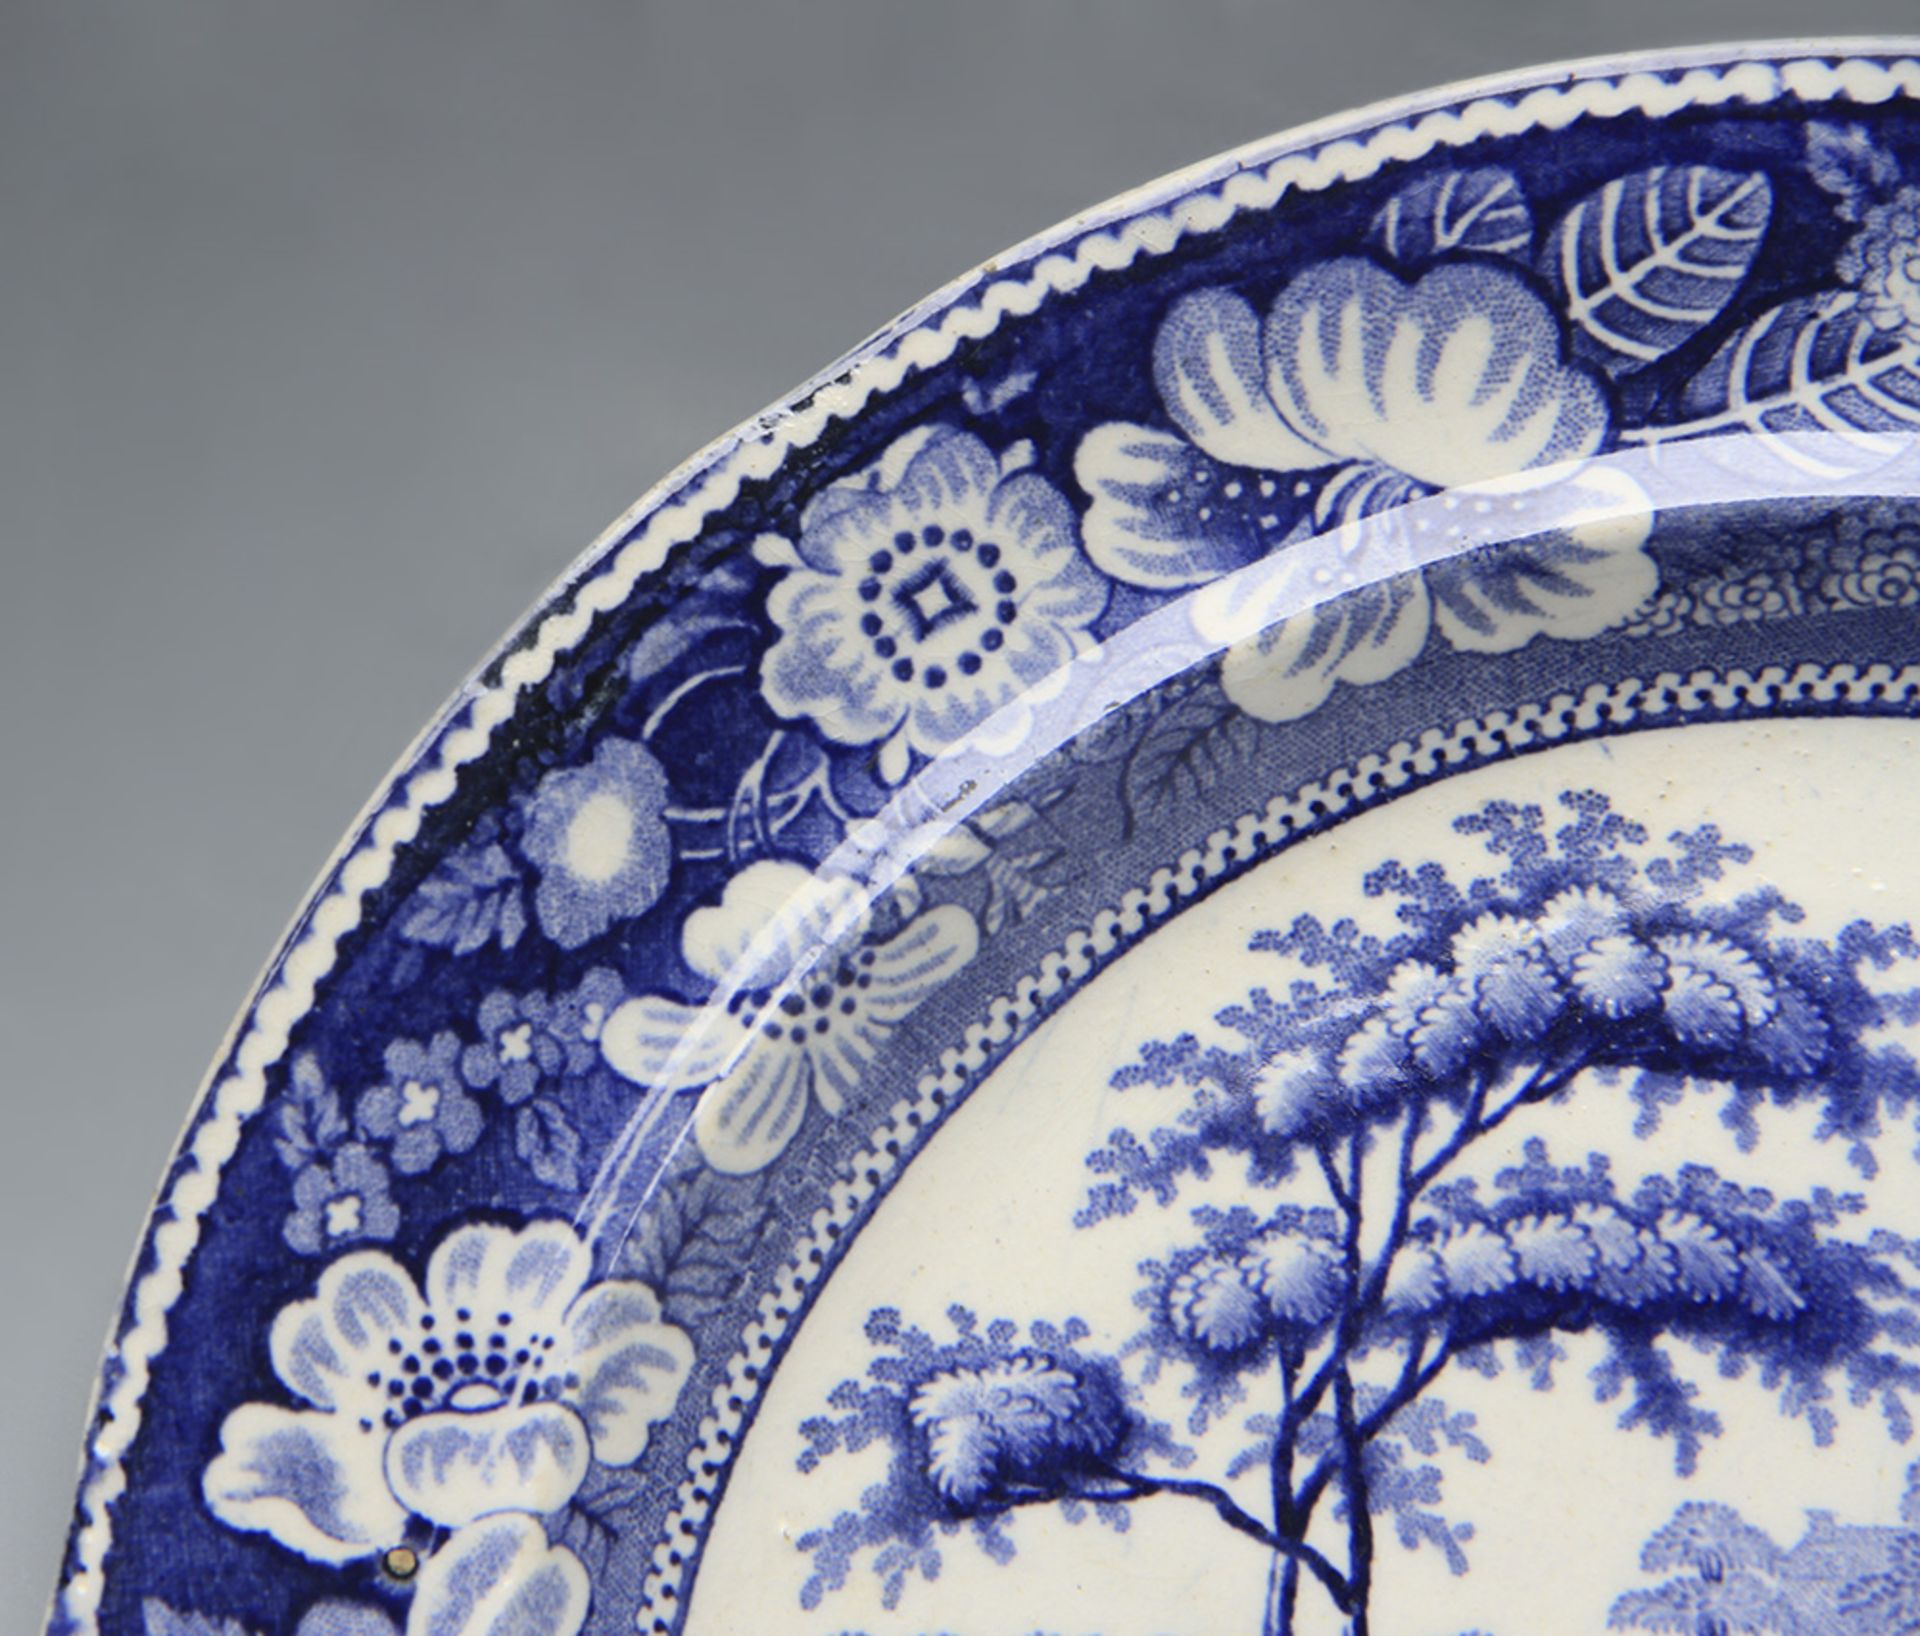 ANTIQUE STAFFORDSHIRE WILD ROSE BLUE & WHITE PLATE c.1830 - Image 5 of 11